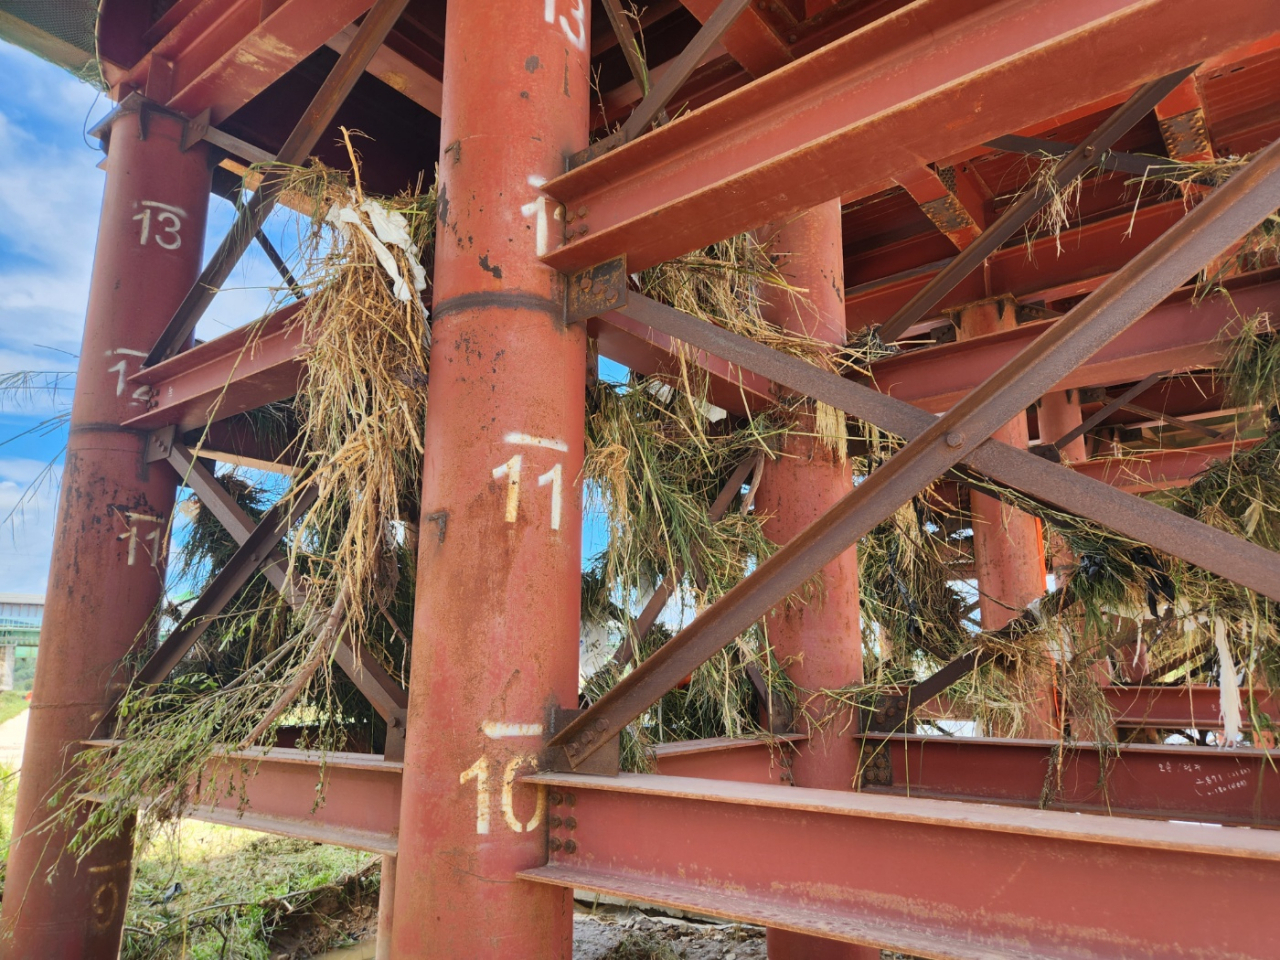 Shattered pieces of trees are seen hanging in the Miho Bridge in Osong-eup, North Chungcheong Province, in this photo taken Monday. The bridge is near the underpass that flooded Saturday and left 14 people dead or missing as of Monday. (Yoon Min-sik/The Korea Herald)